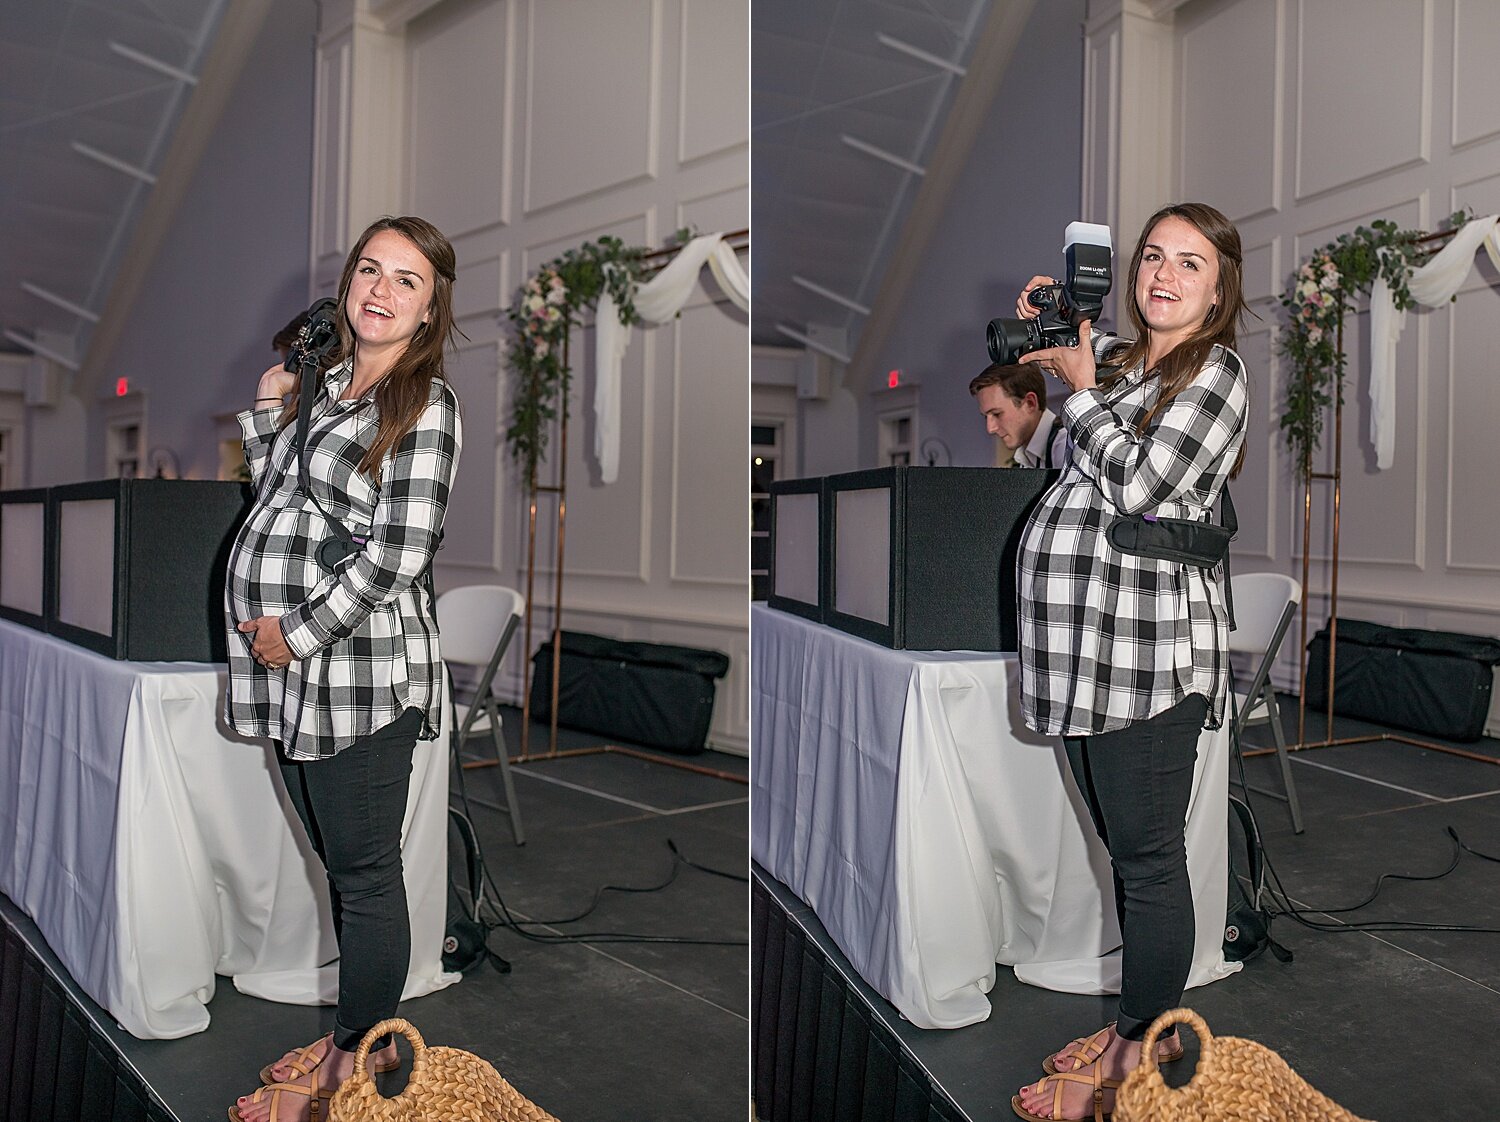  2018-2019 I shot weddings pregnant for the first time. This was from our last wedding before Emma arrived! She arrived 6 weeks later, but I shot this wedding 4 weeks out from my due date…I looked…huge! I had a few people concerned but I was proud of